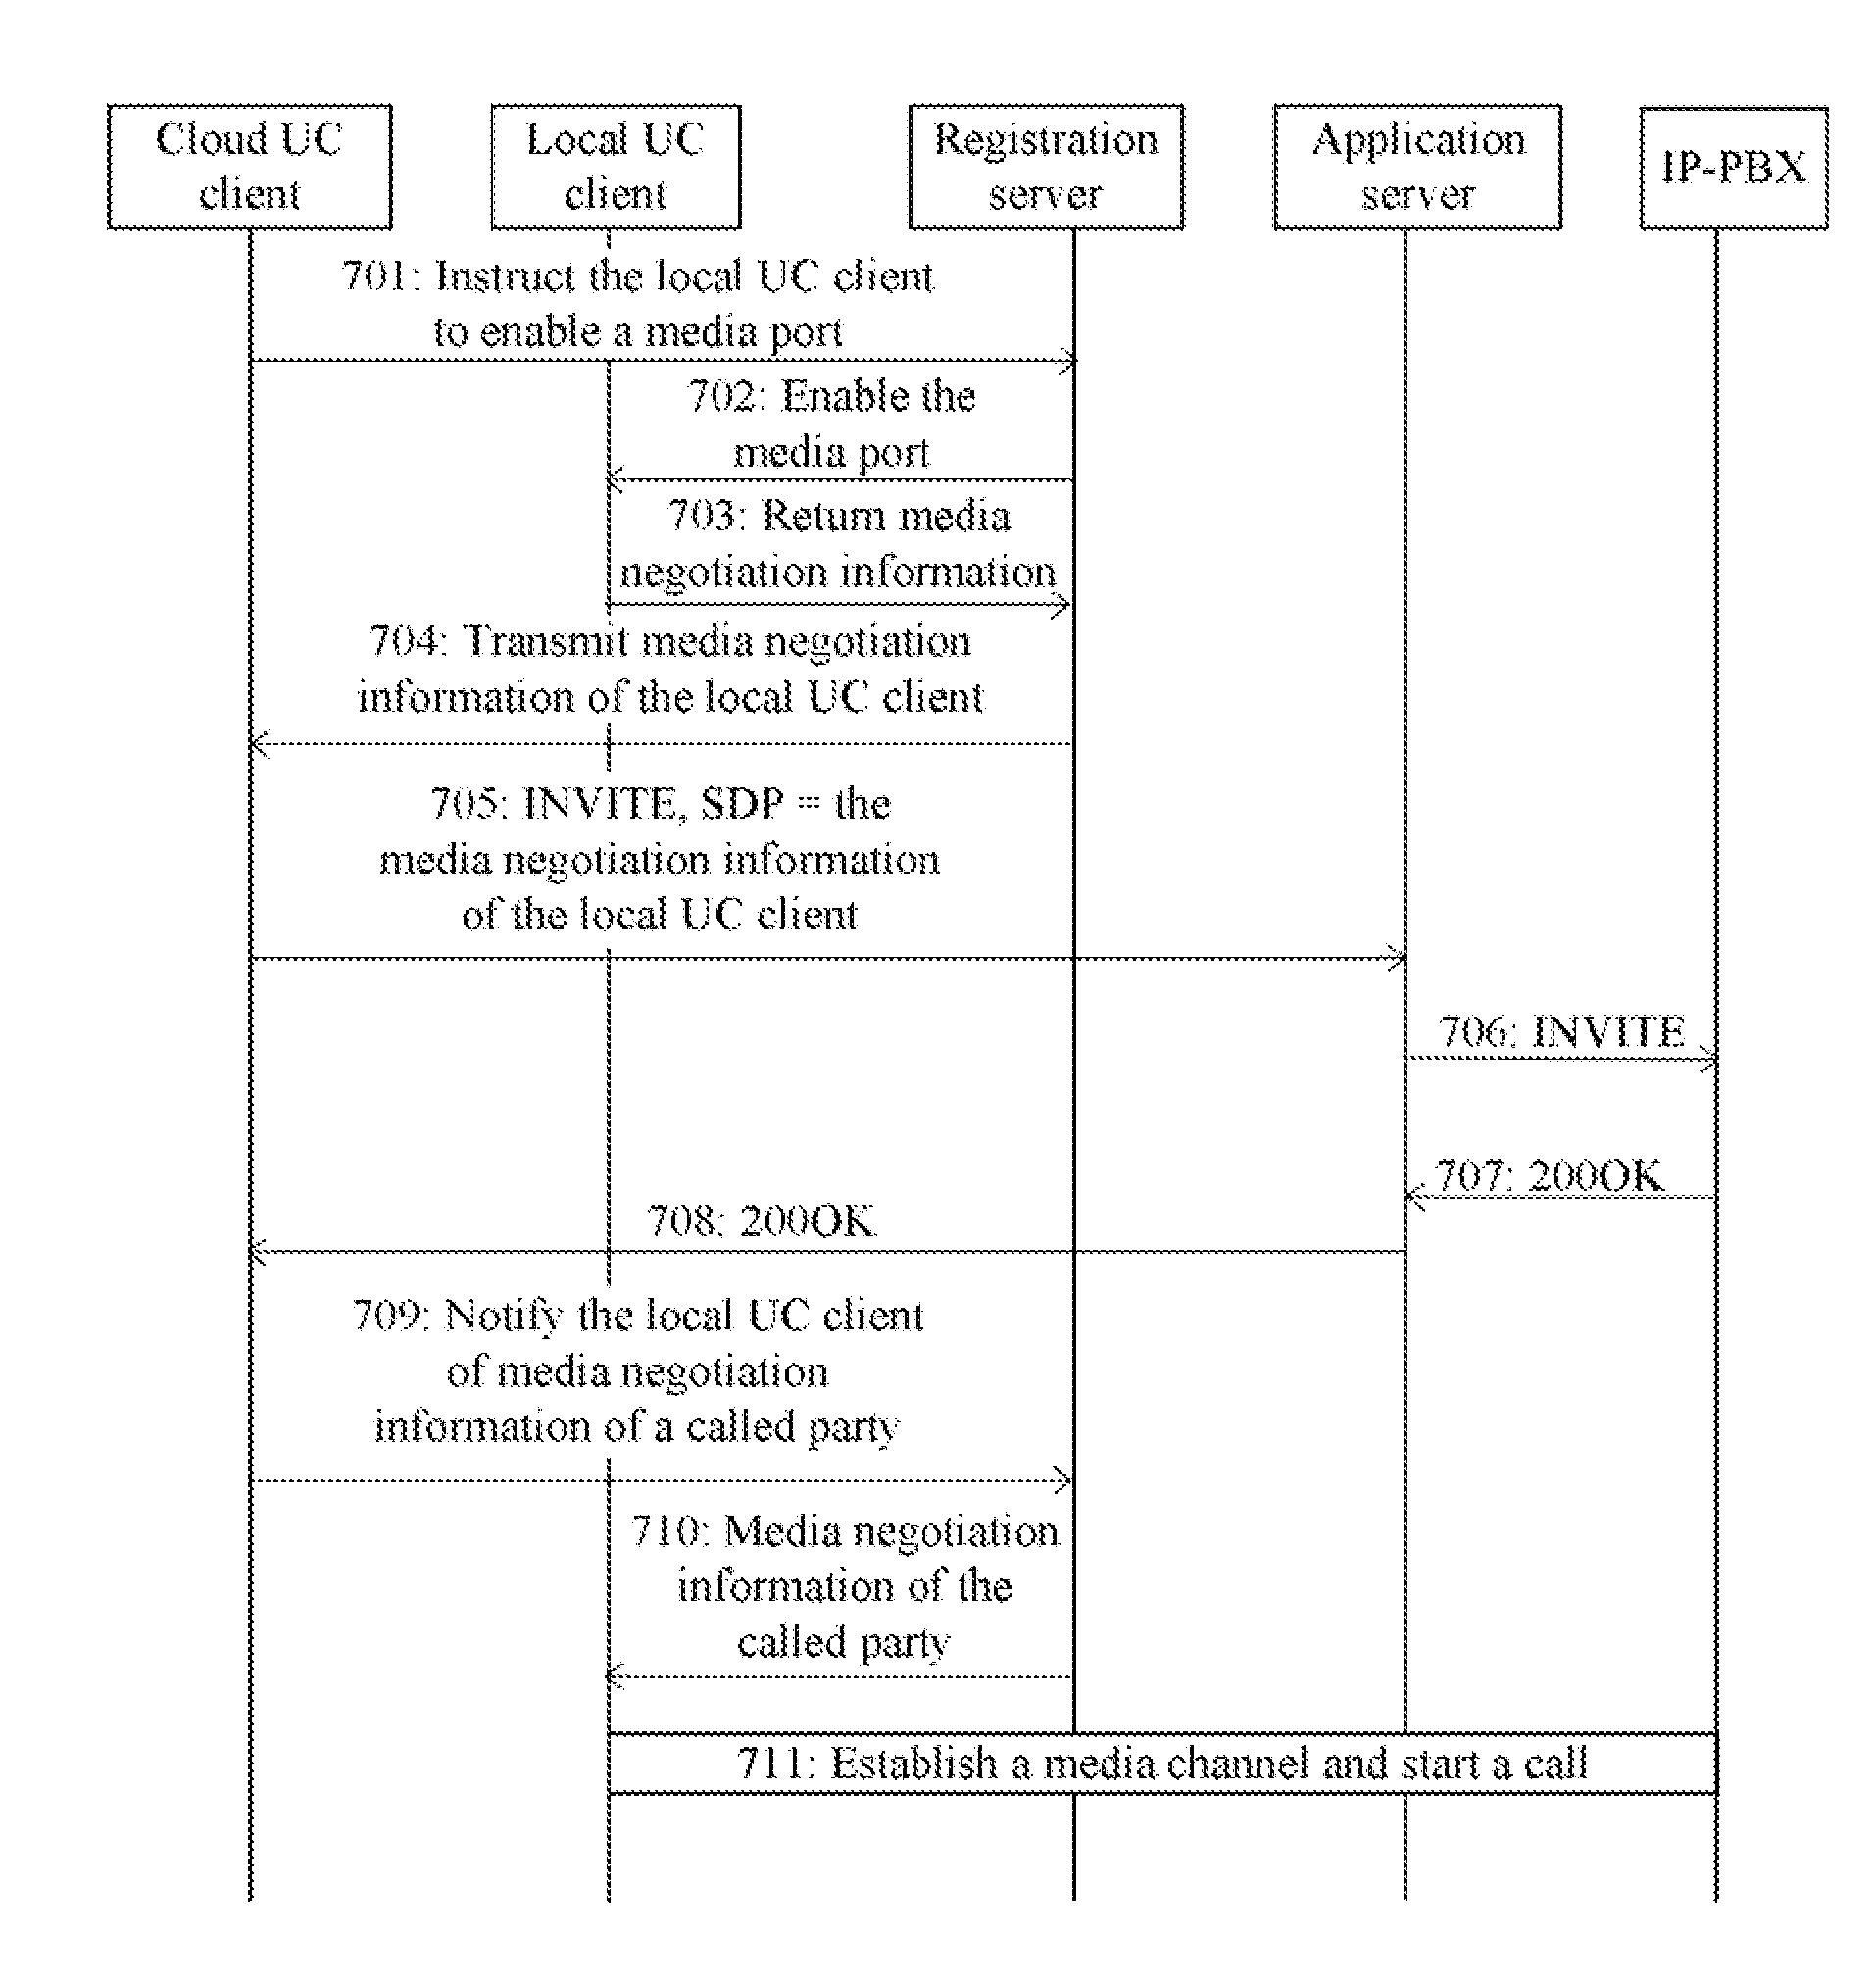 Method and apparatus for improving voice or video transmission quality in cloud computing mode